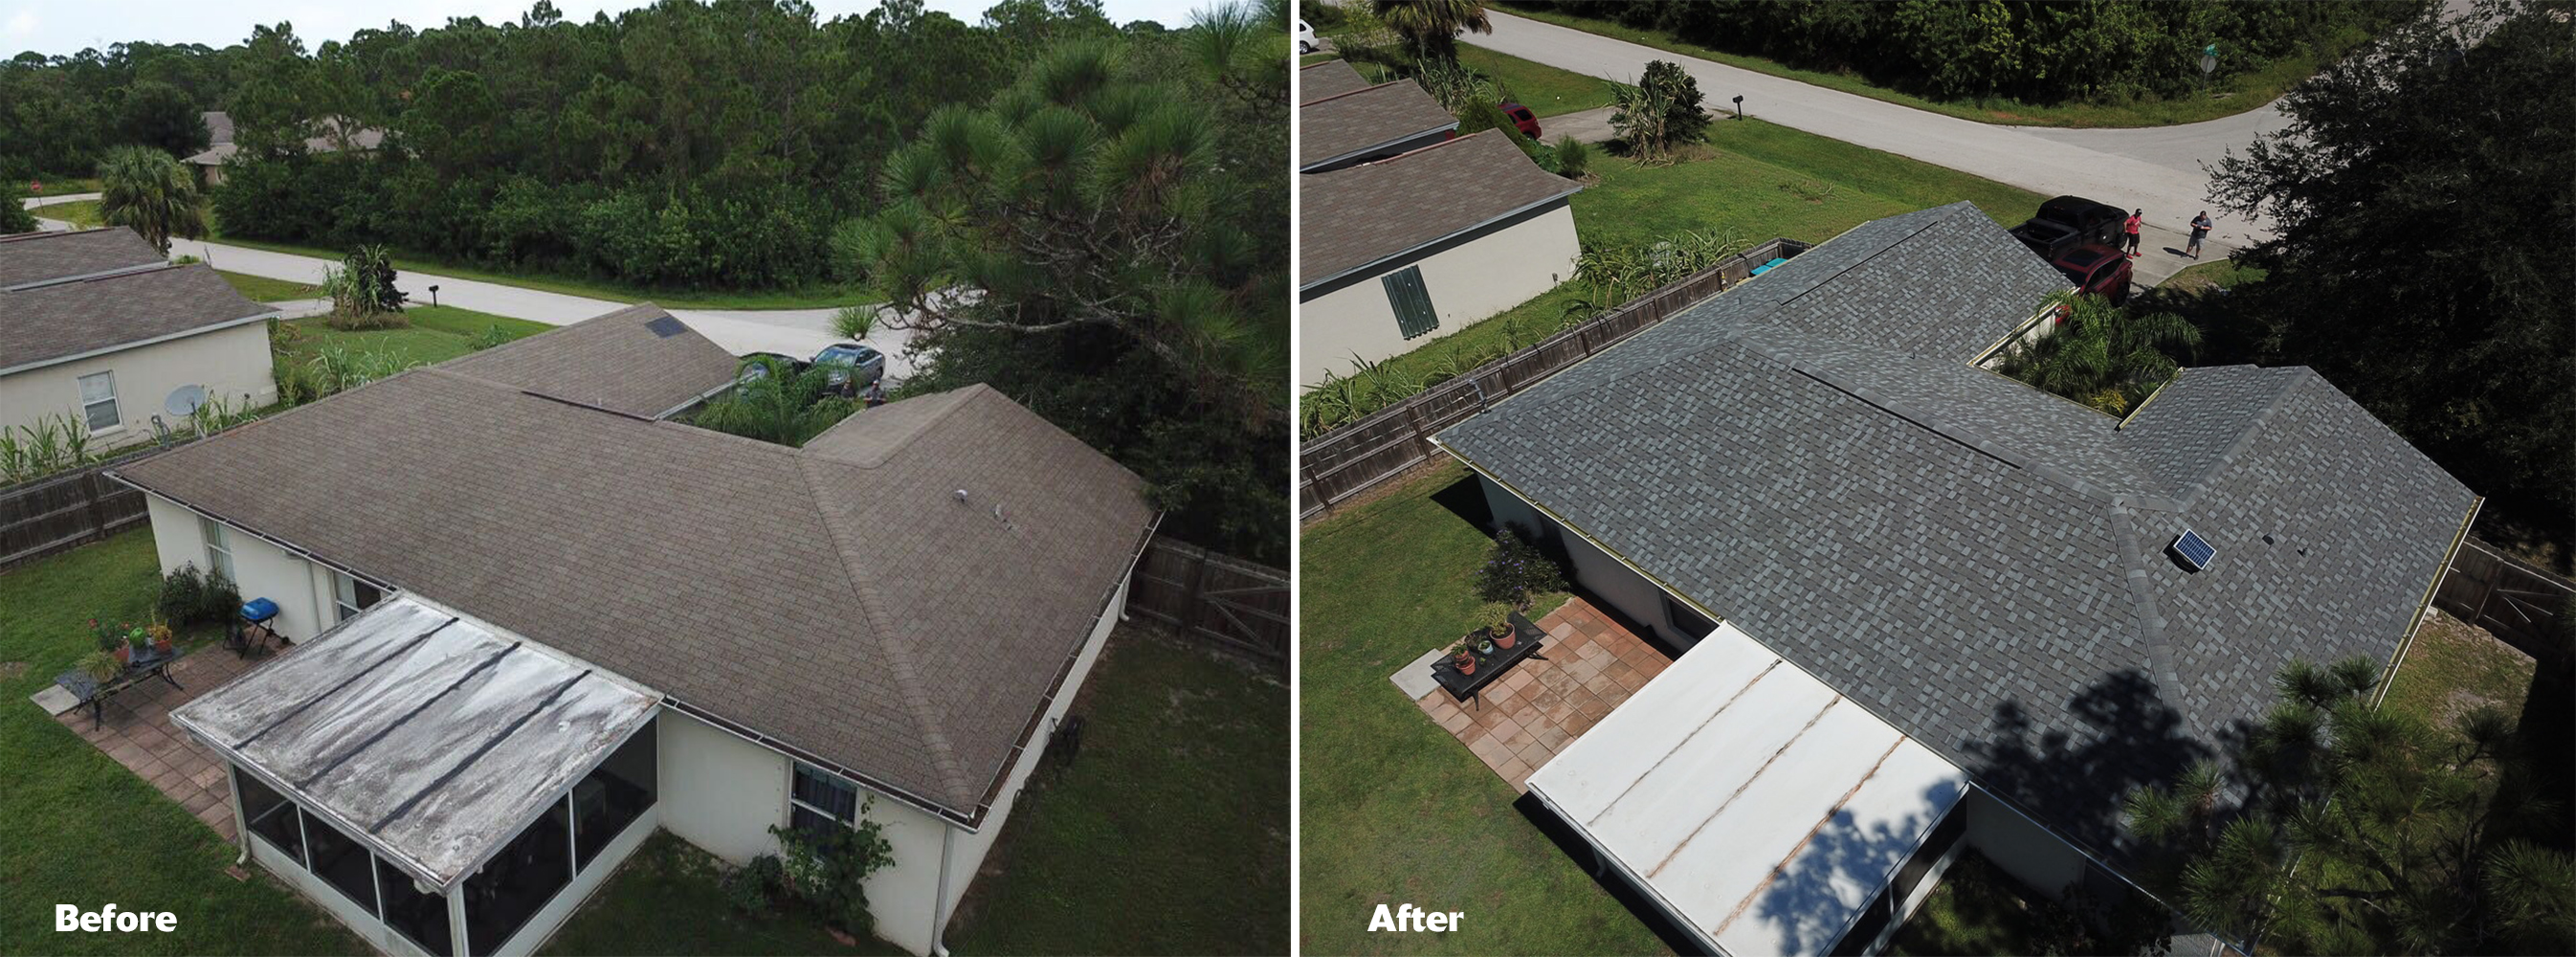 Langford roof - before and after